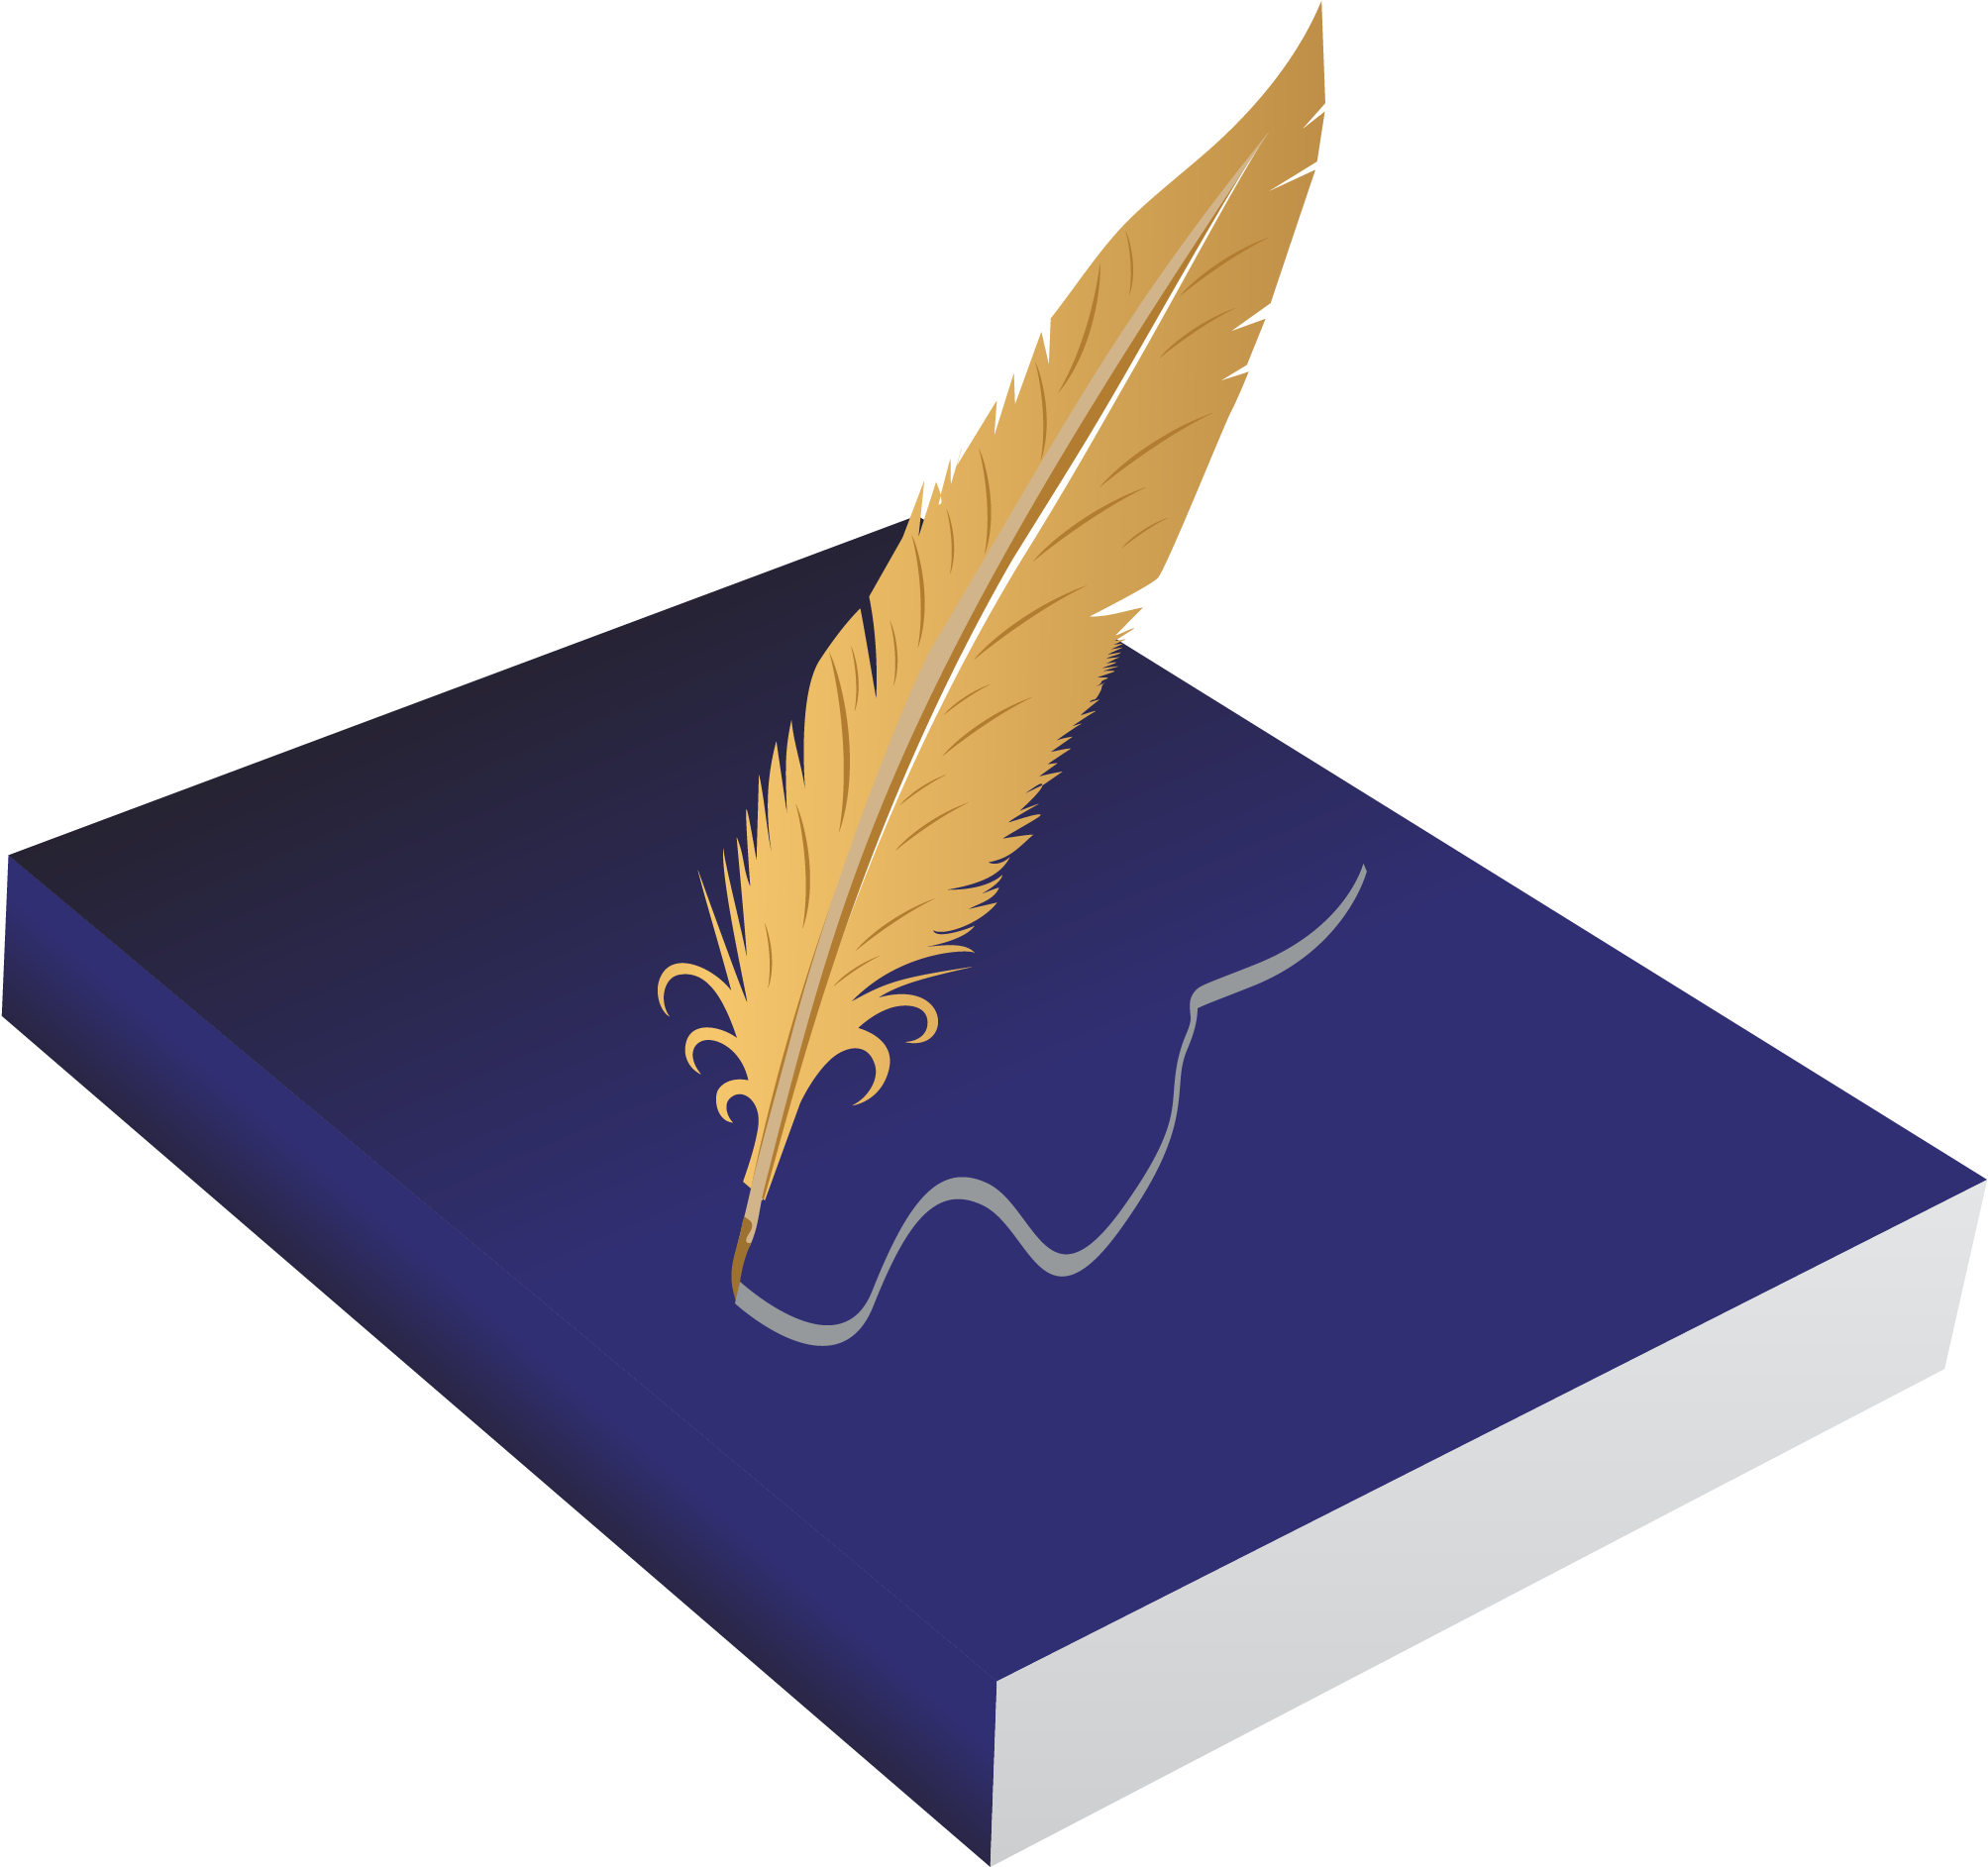 A Feather On A Book